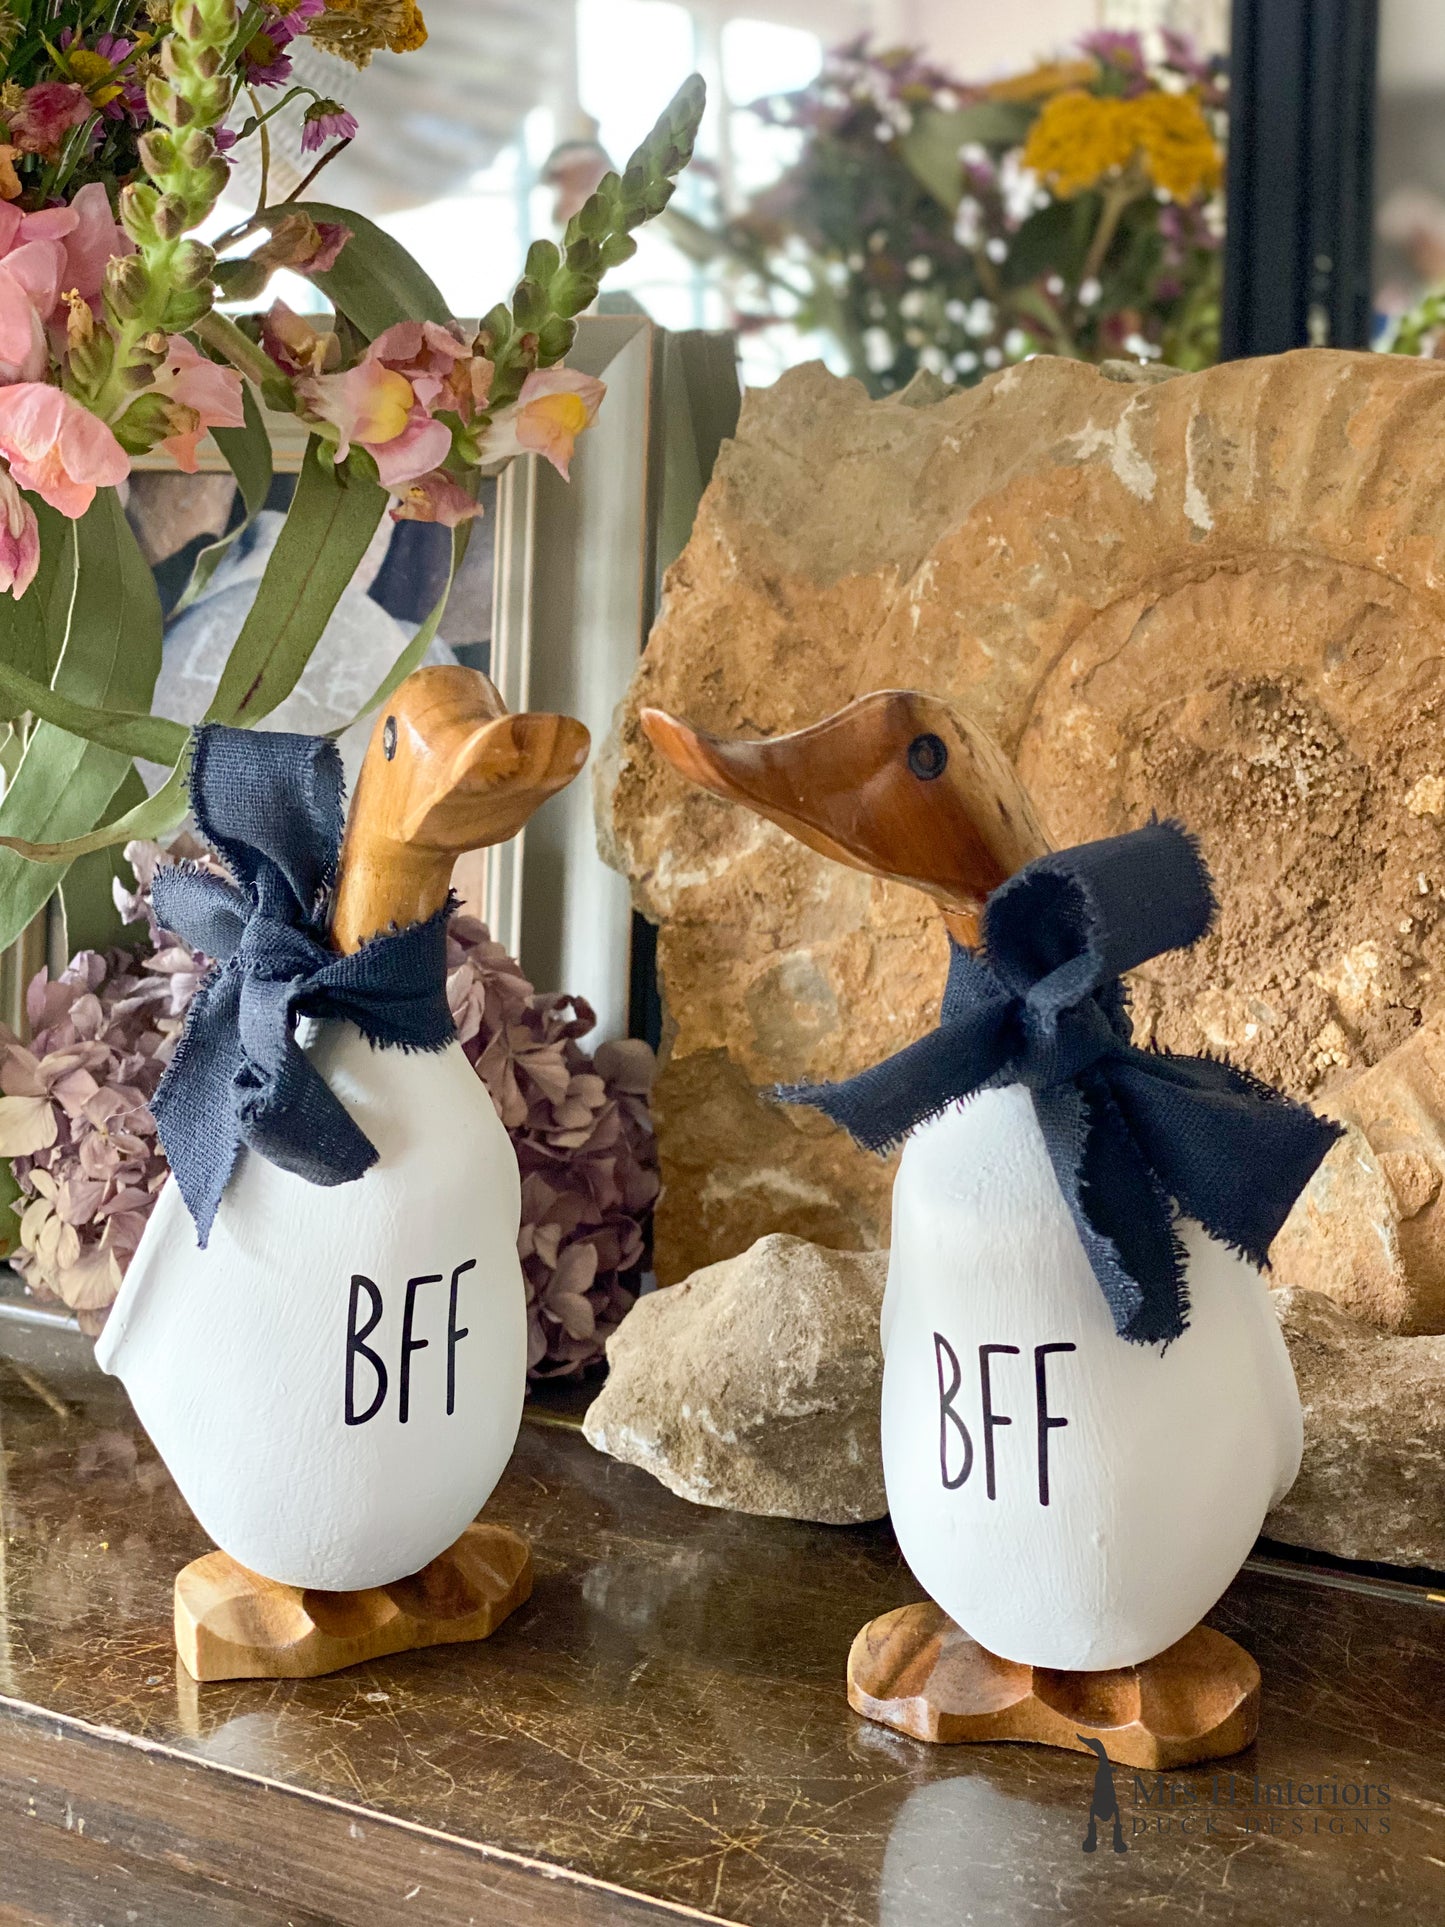 BFF Best Friends Forever Duck - Decorated Wooden Duck in Boots by Mrs H the Duck Lady